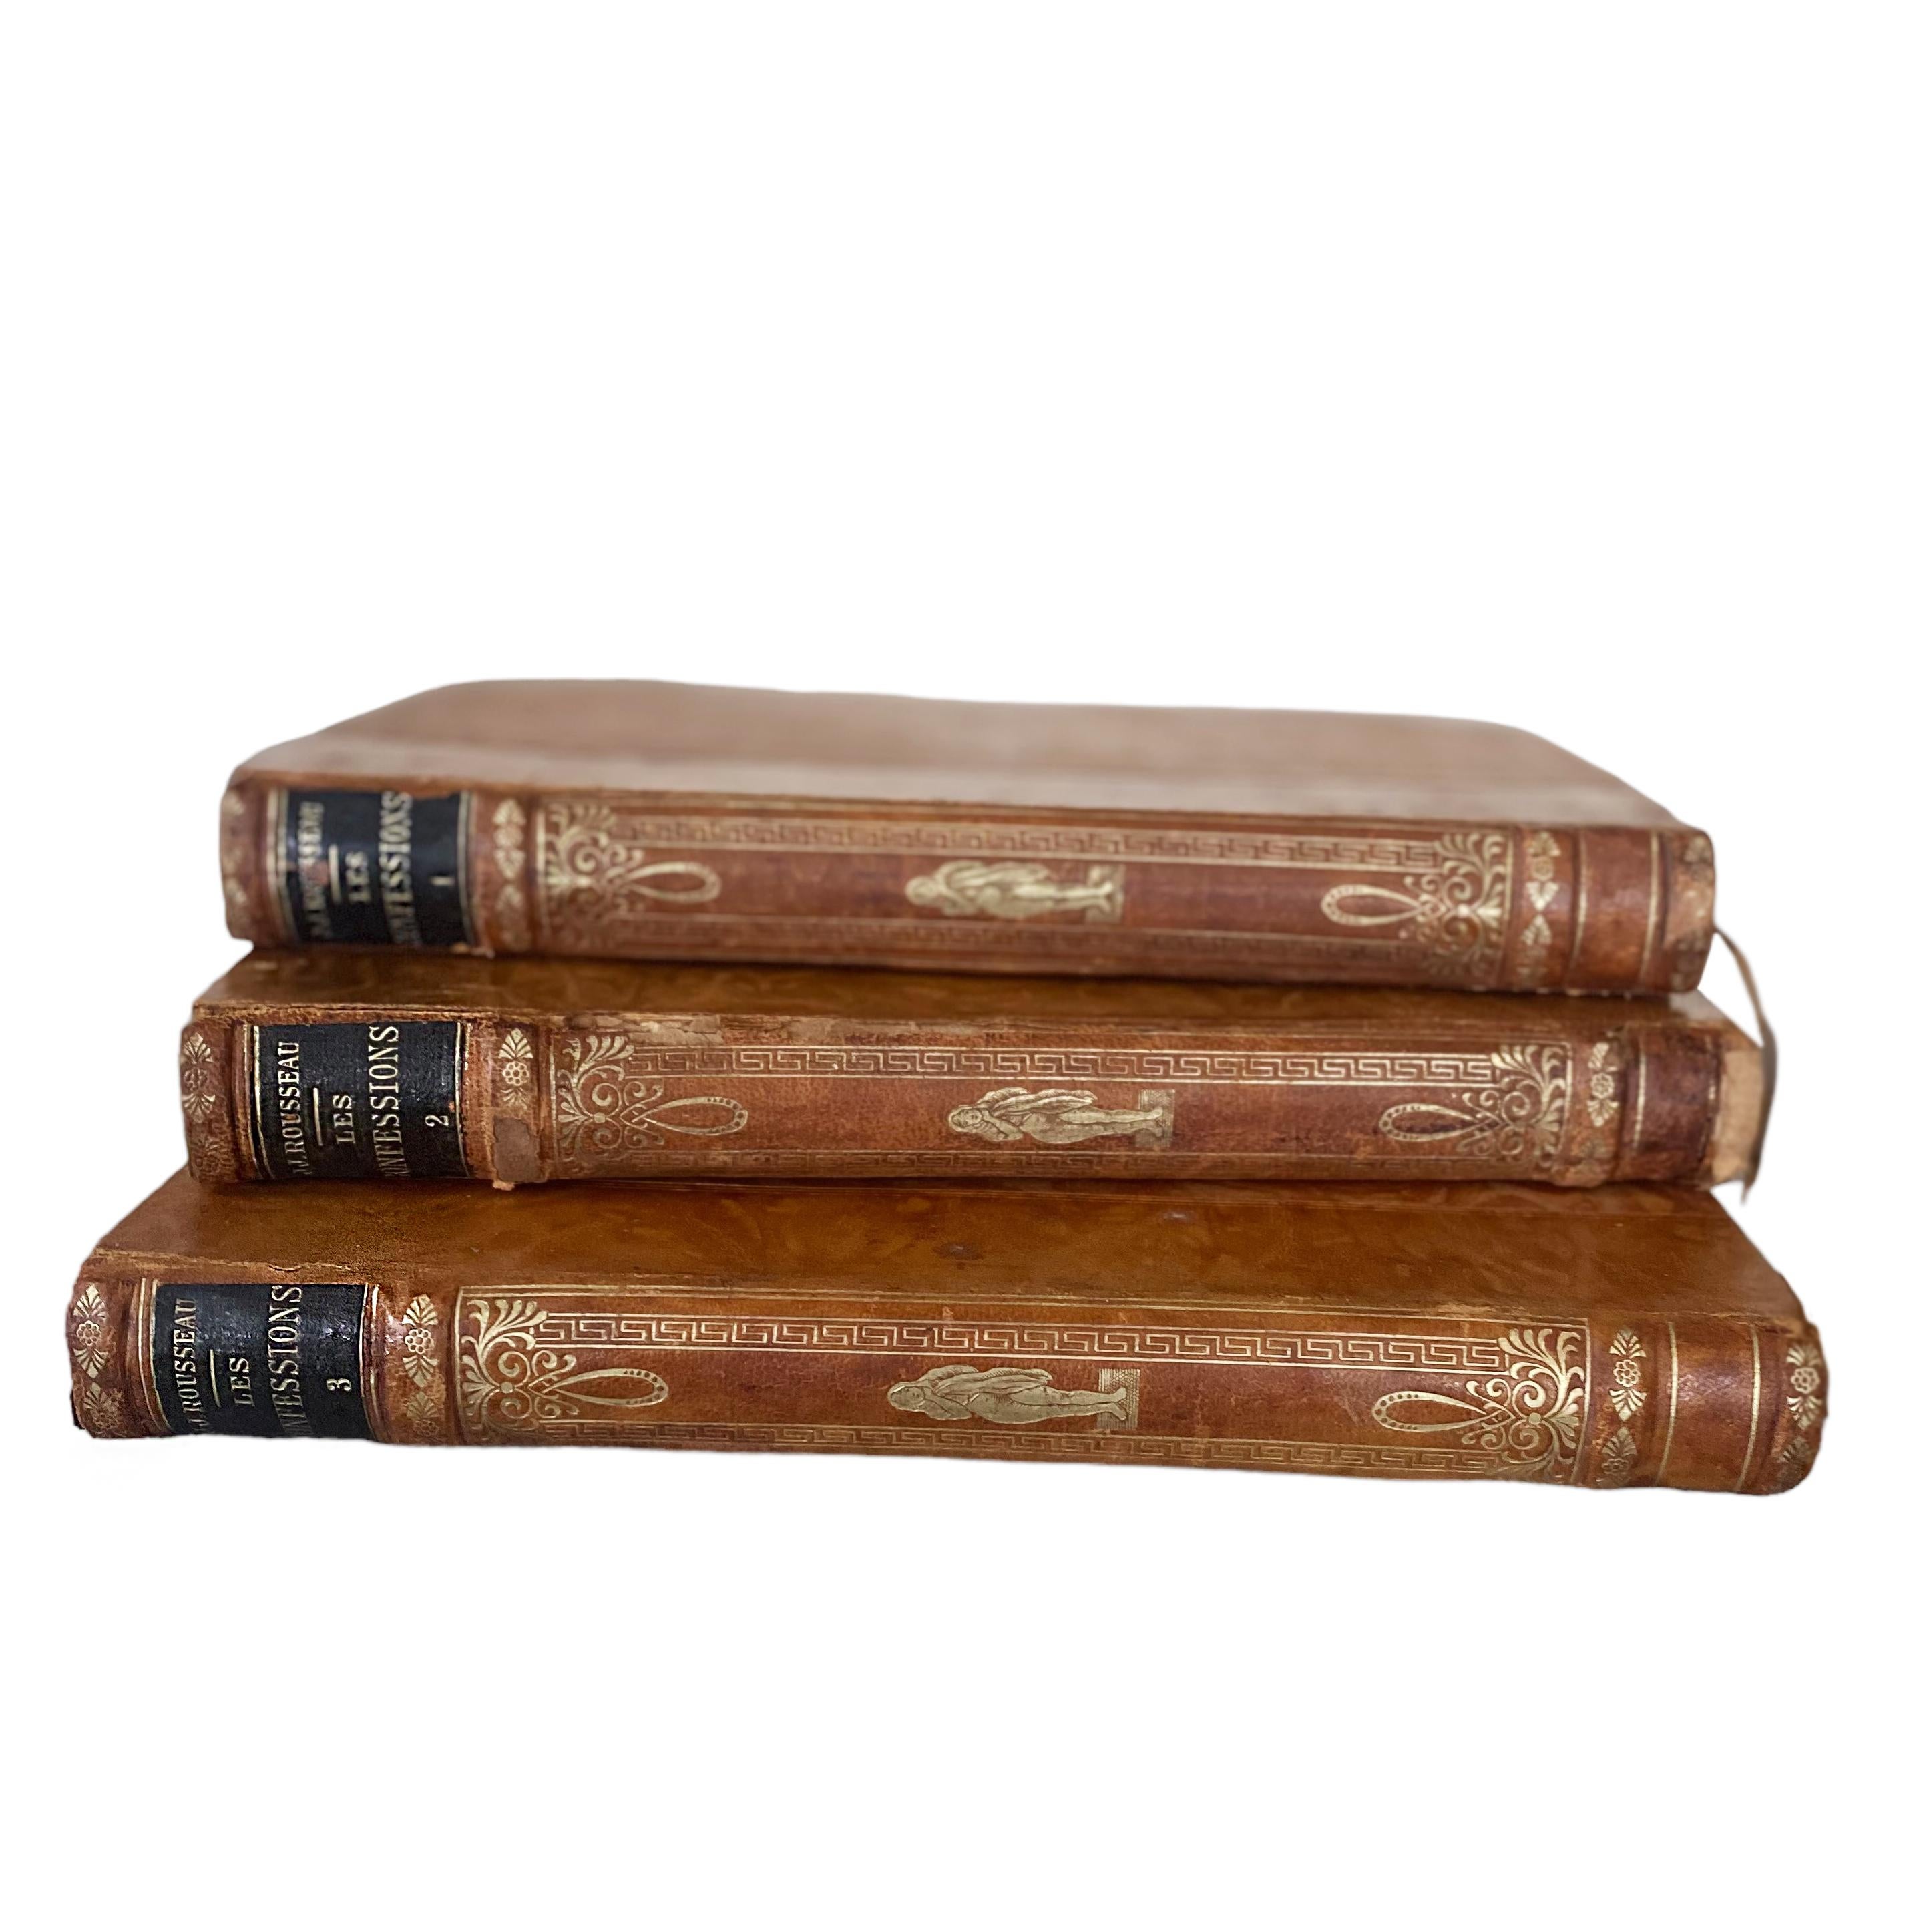 Les Confessions French Antique Books by J-J ROUSSEAU Leather Bound 3 Volumes  For Sale 2